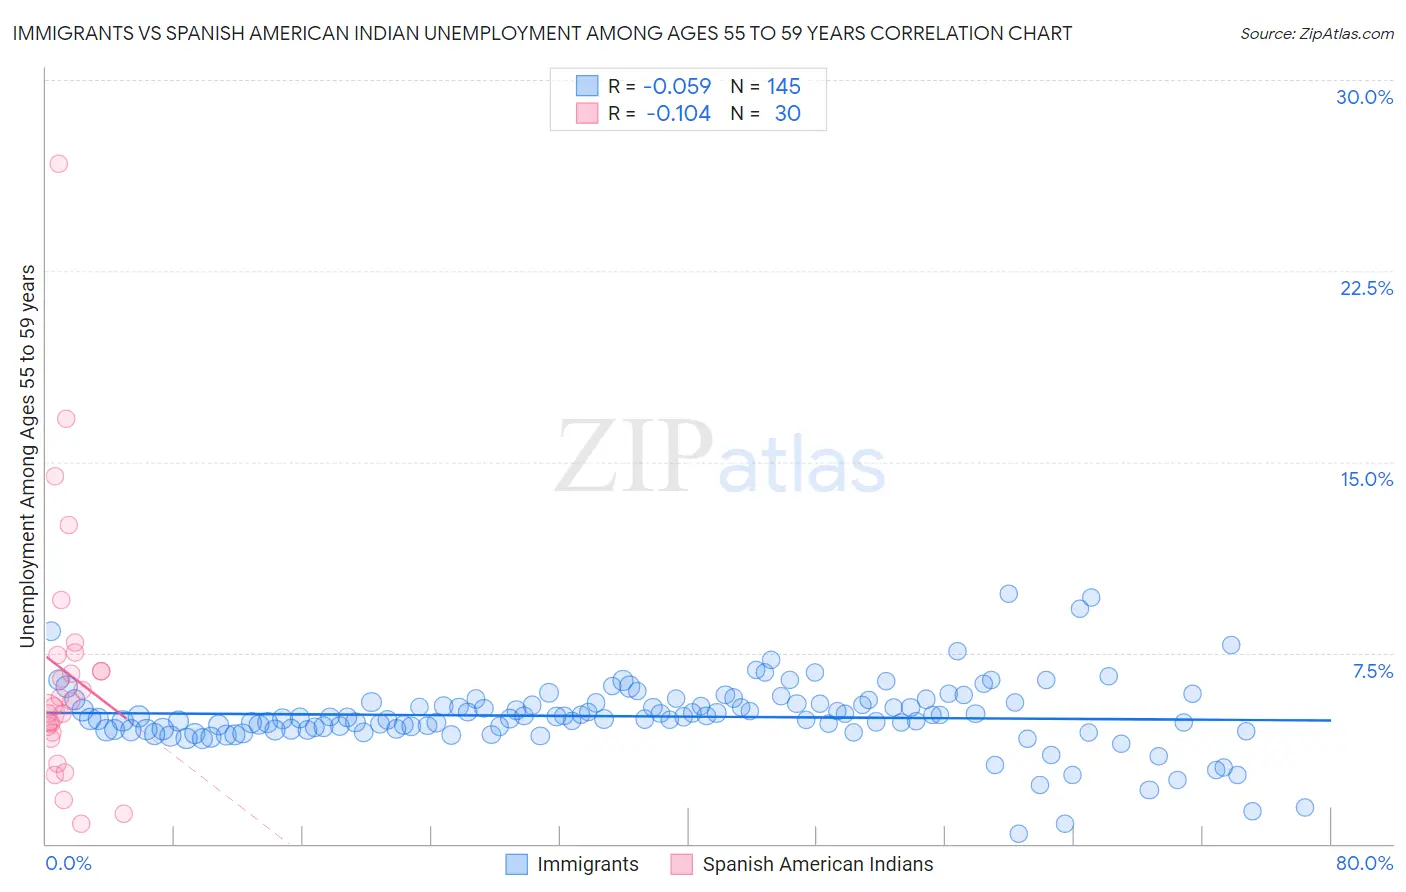 Immigrants vs Spanish American Indian Unemployment Among Ages 55 to 59 years